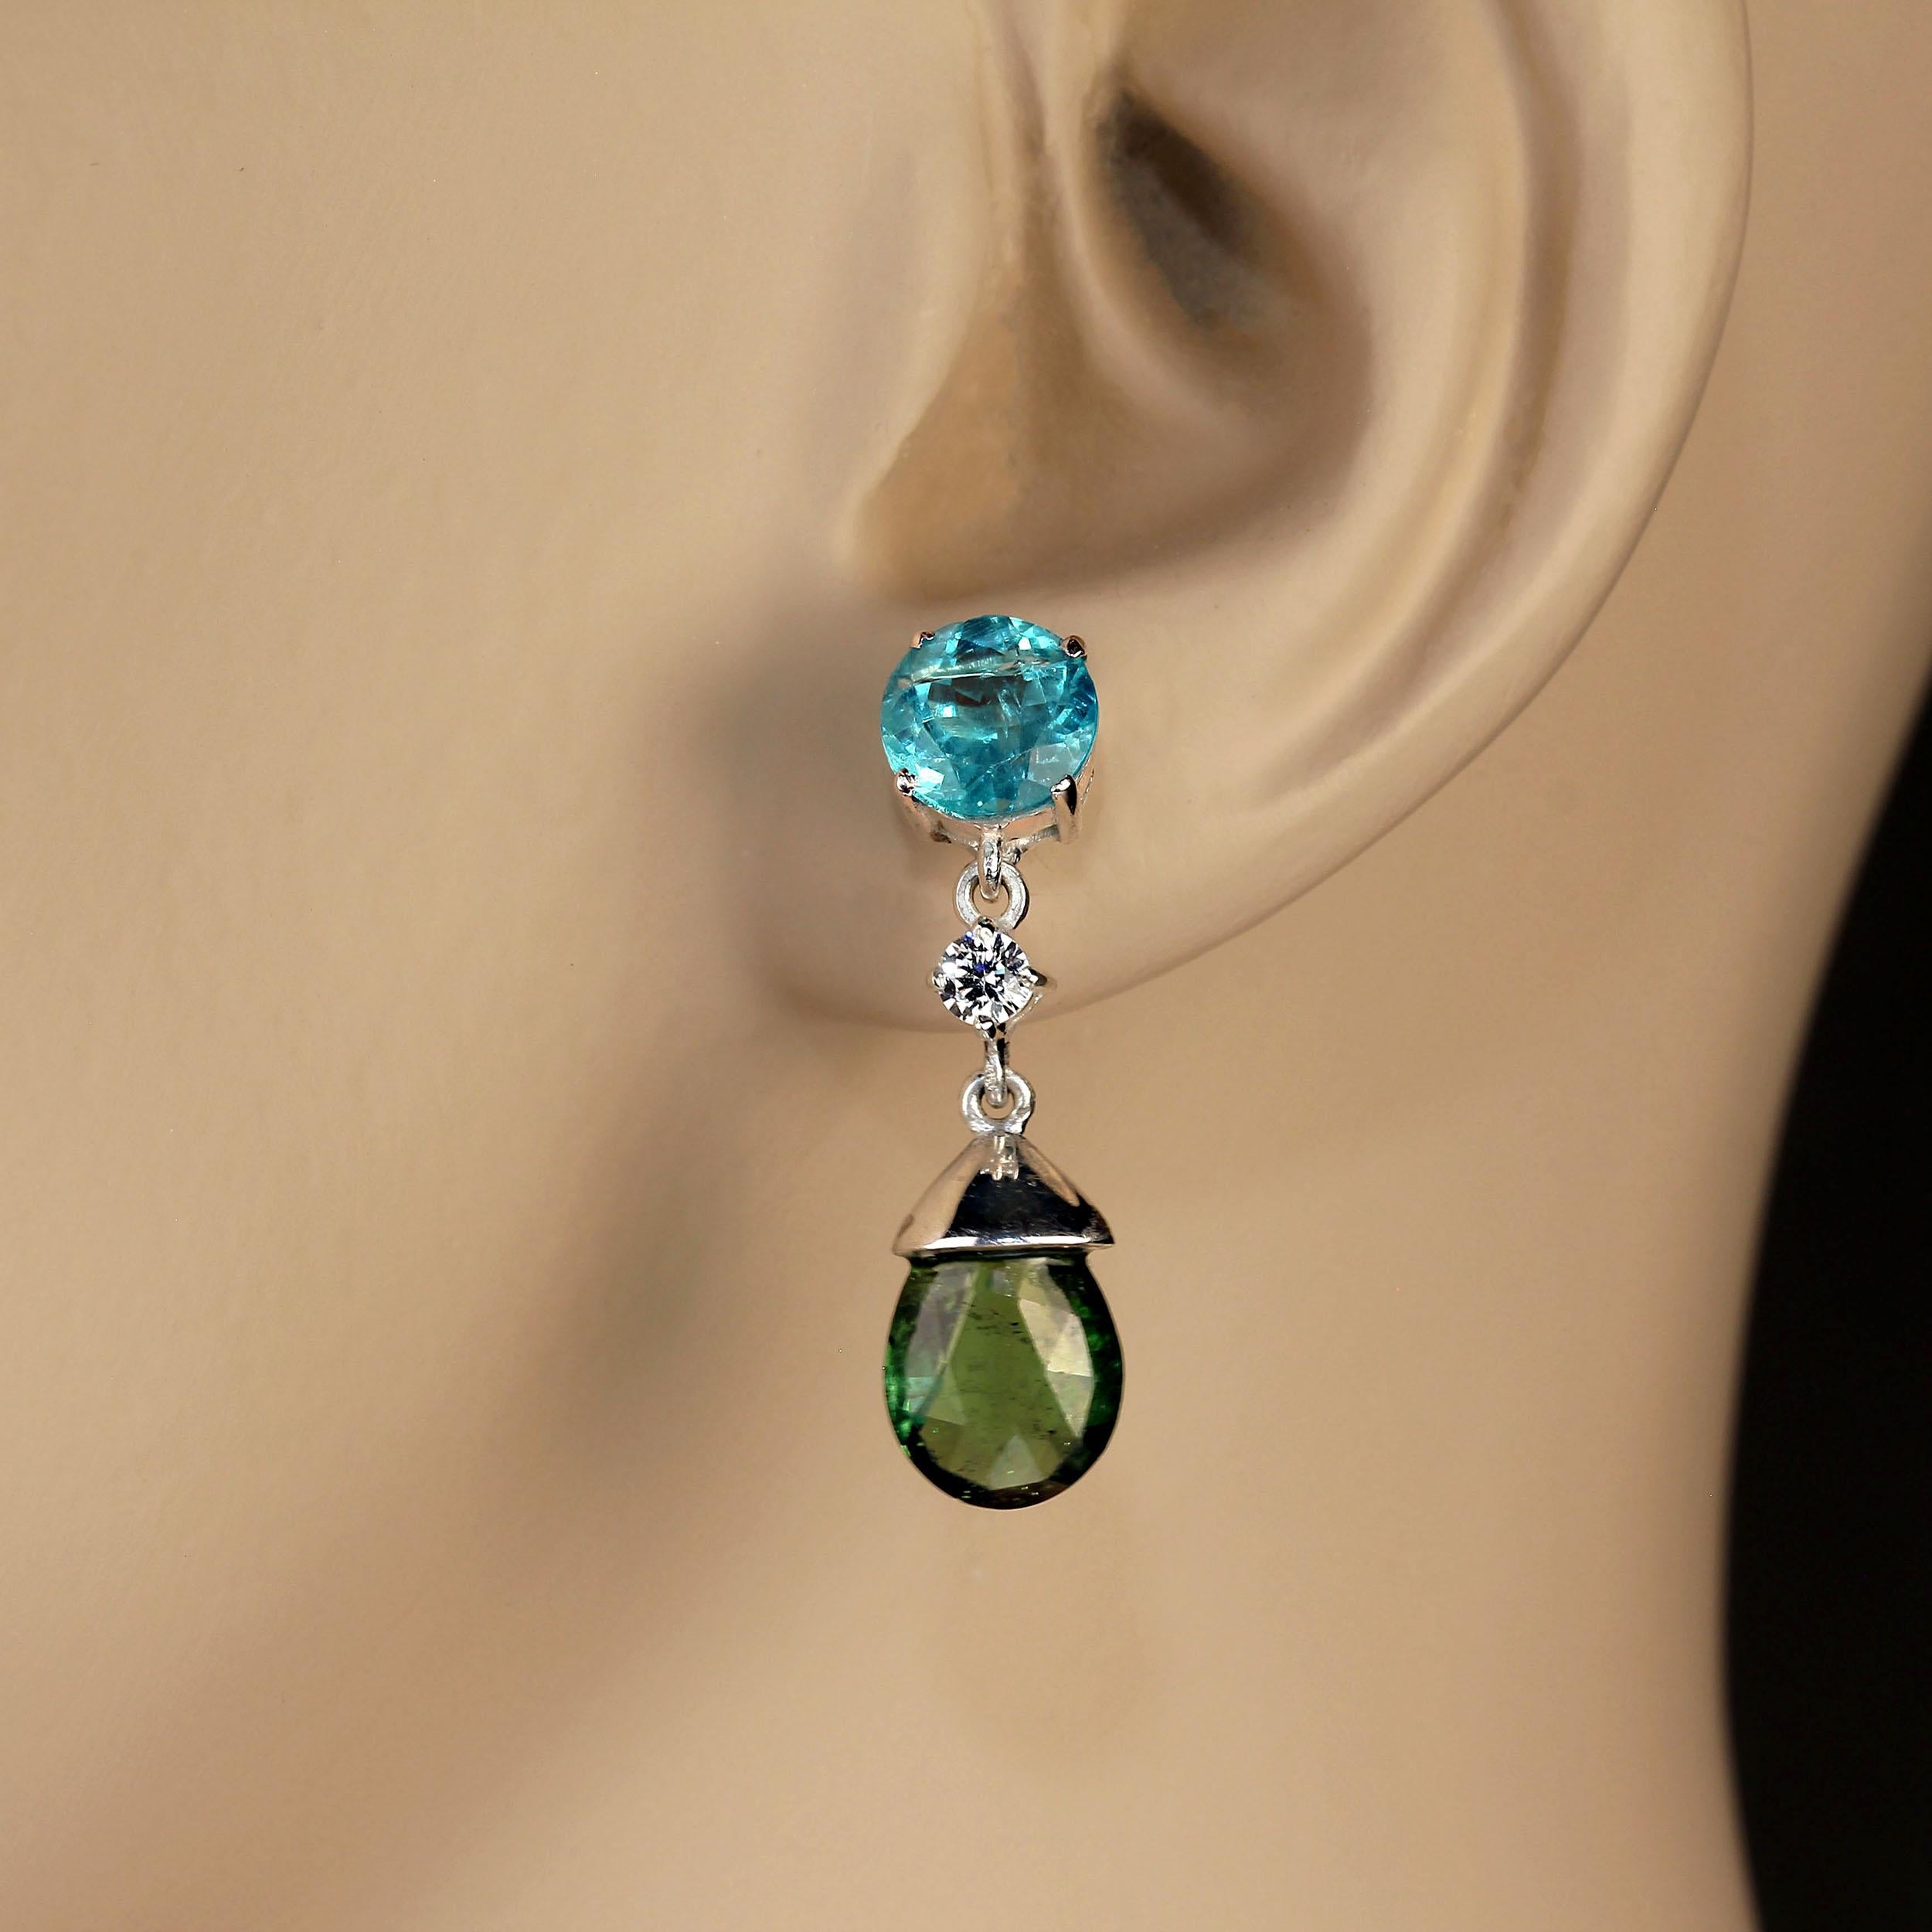 Dangle earrings of sparkling Blue Topaz and deep green Tourmaline.  These lovely dangle earrings have a drop of of 1 inch. The Blue Topaz have a total carat weight of 4.6cts and the green Tourmaline have a total carat weight of 9.61ct.  Genuine